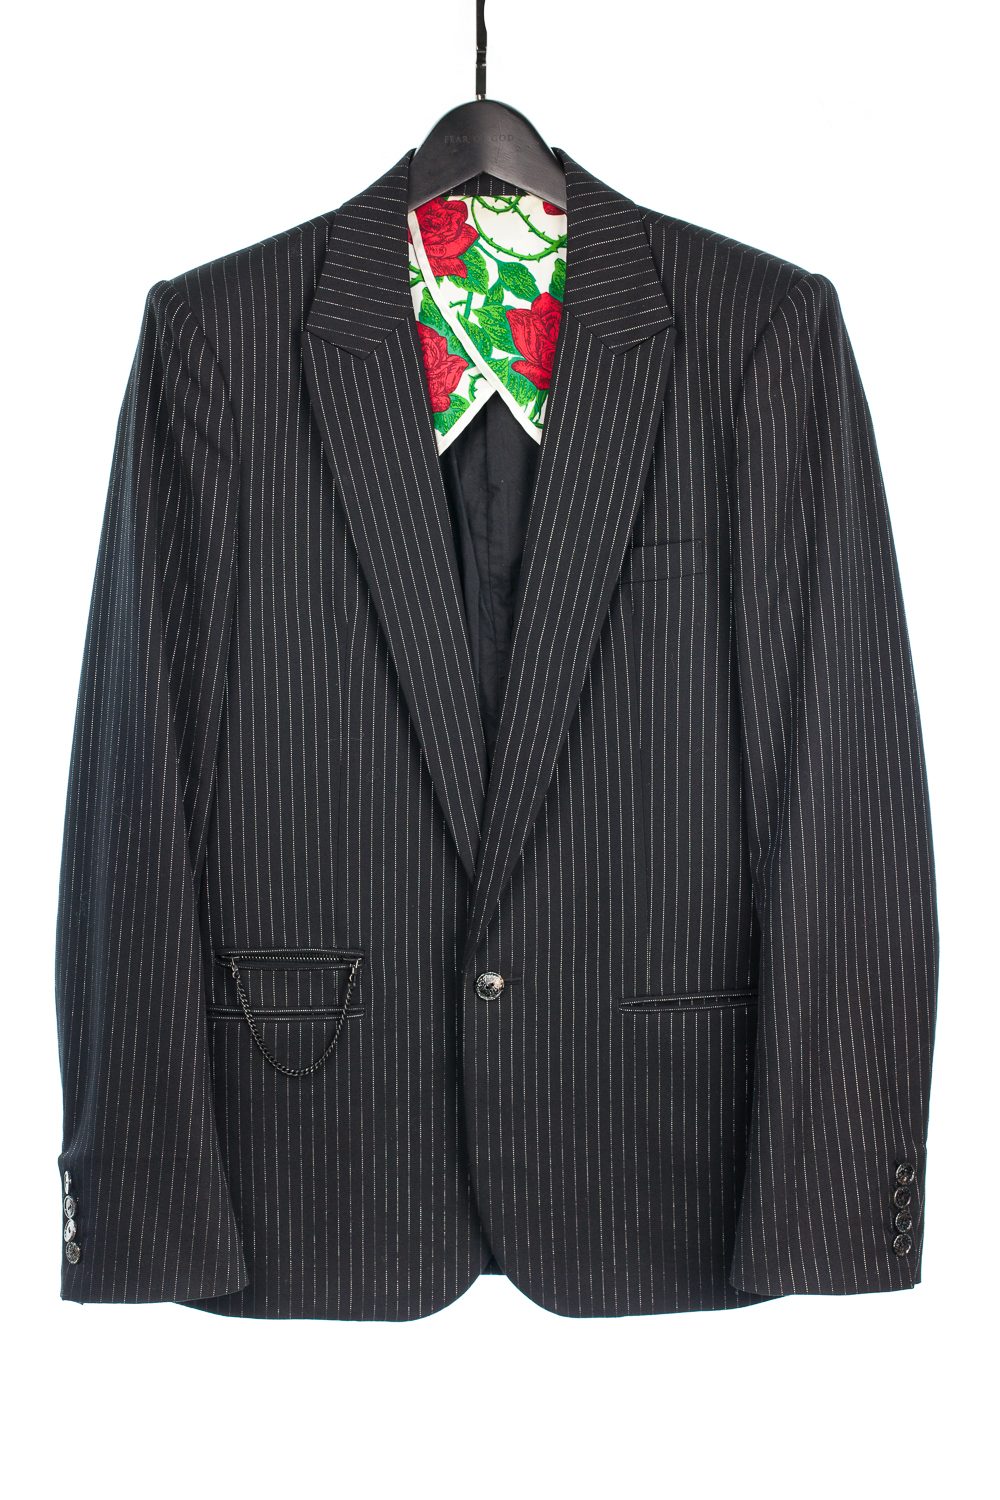 SS06 “Welcome to the Shadow” Silver Thread Pinstripe Blazer